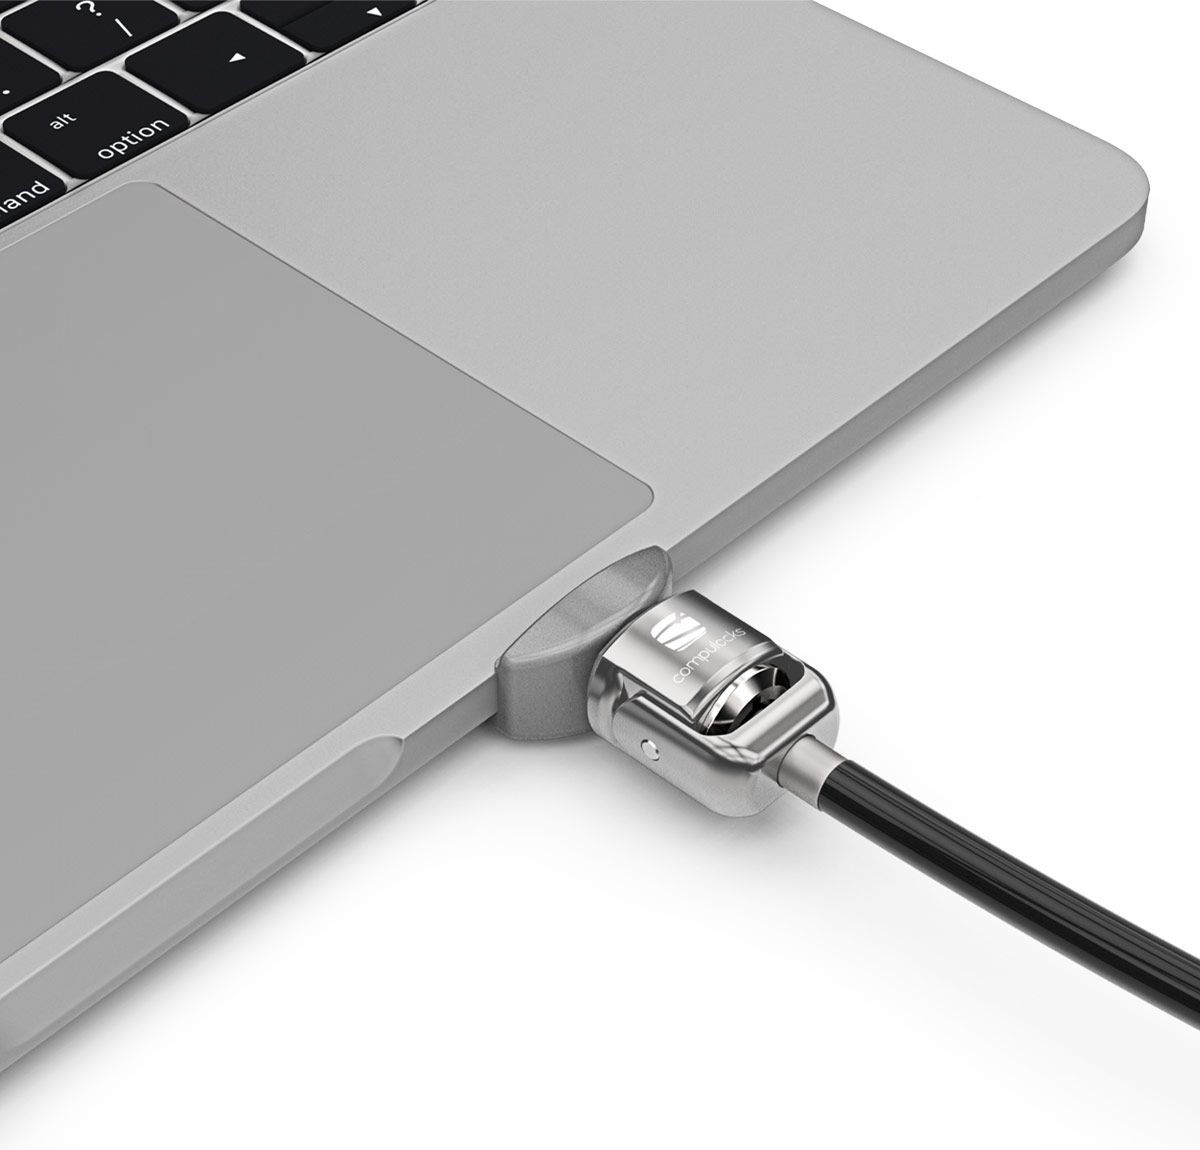 MacBook Secure Case with Cable